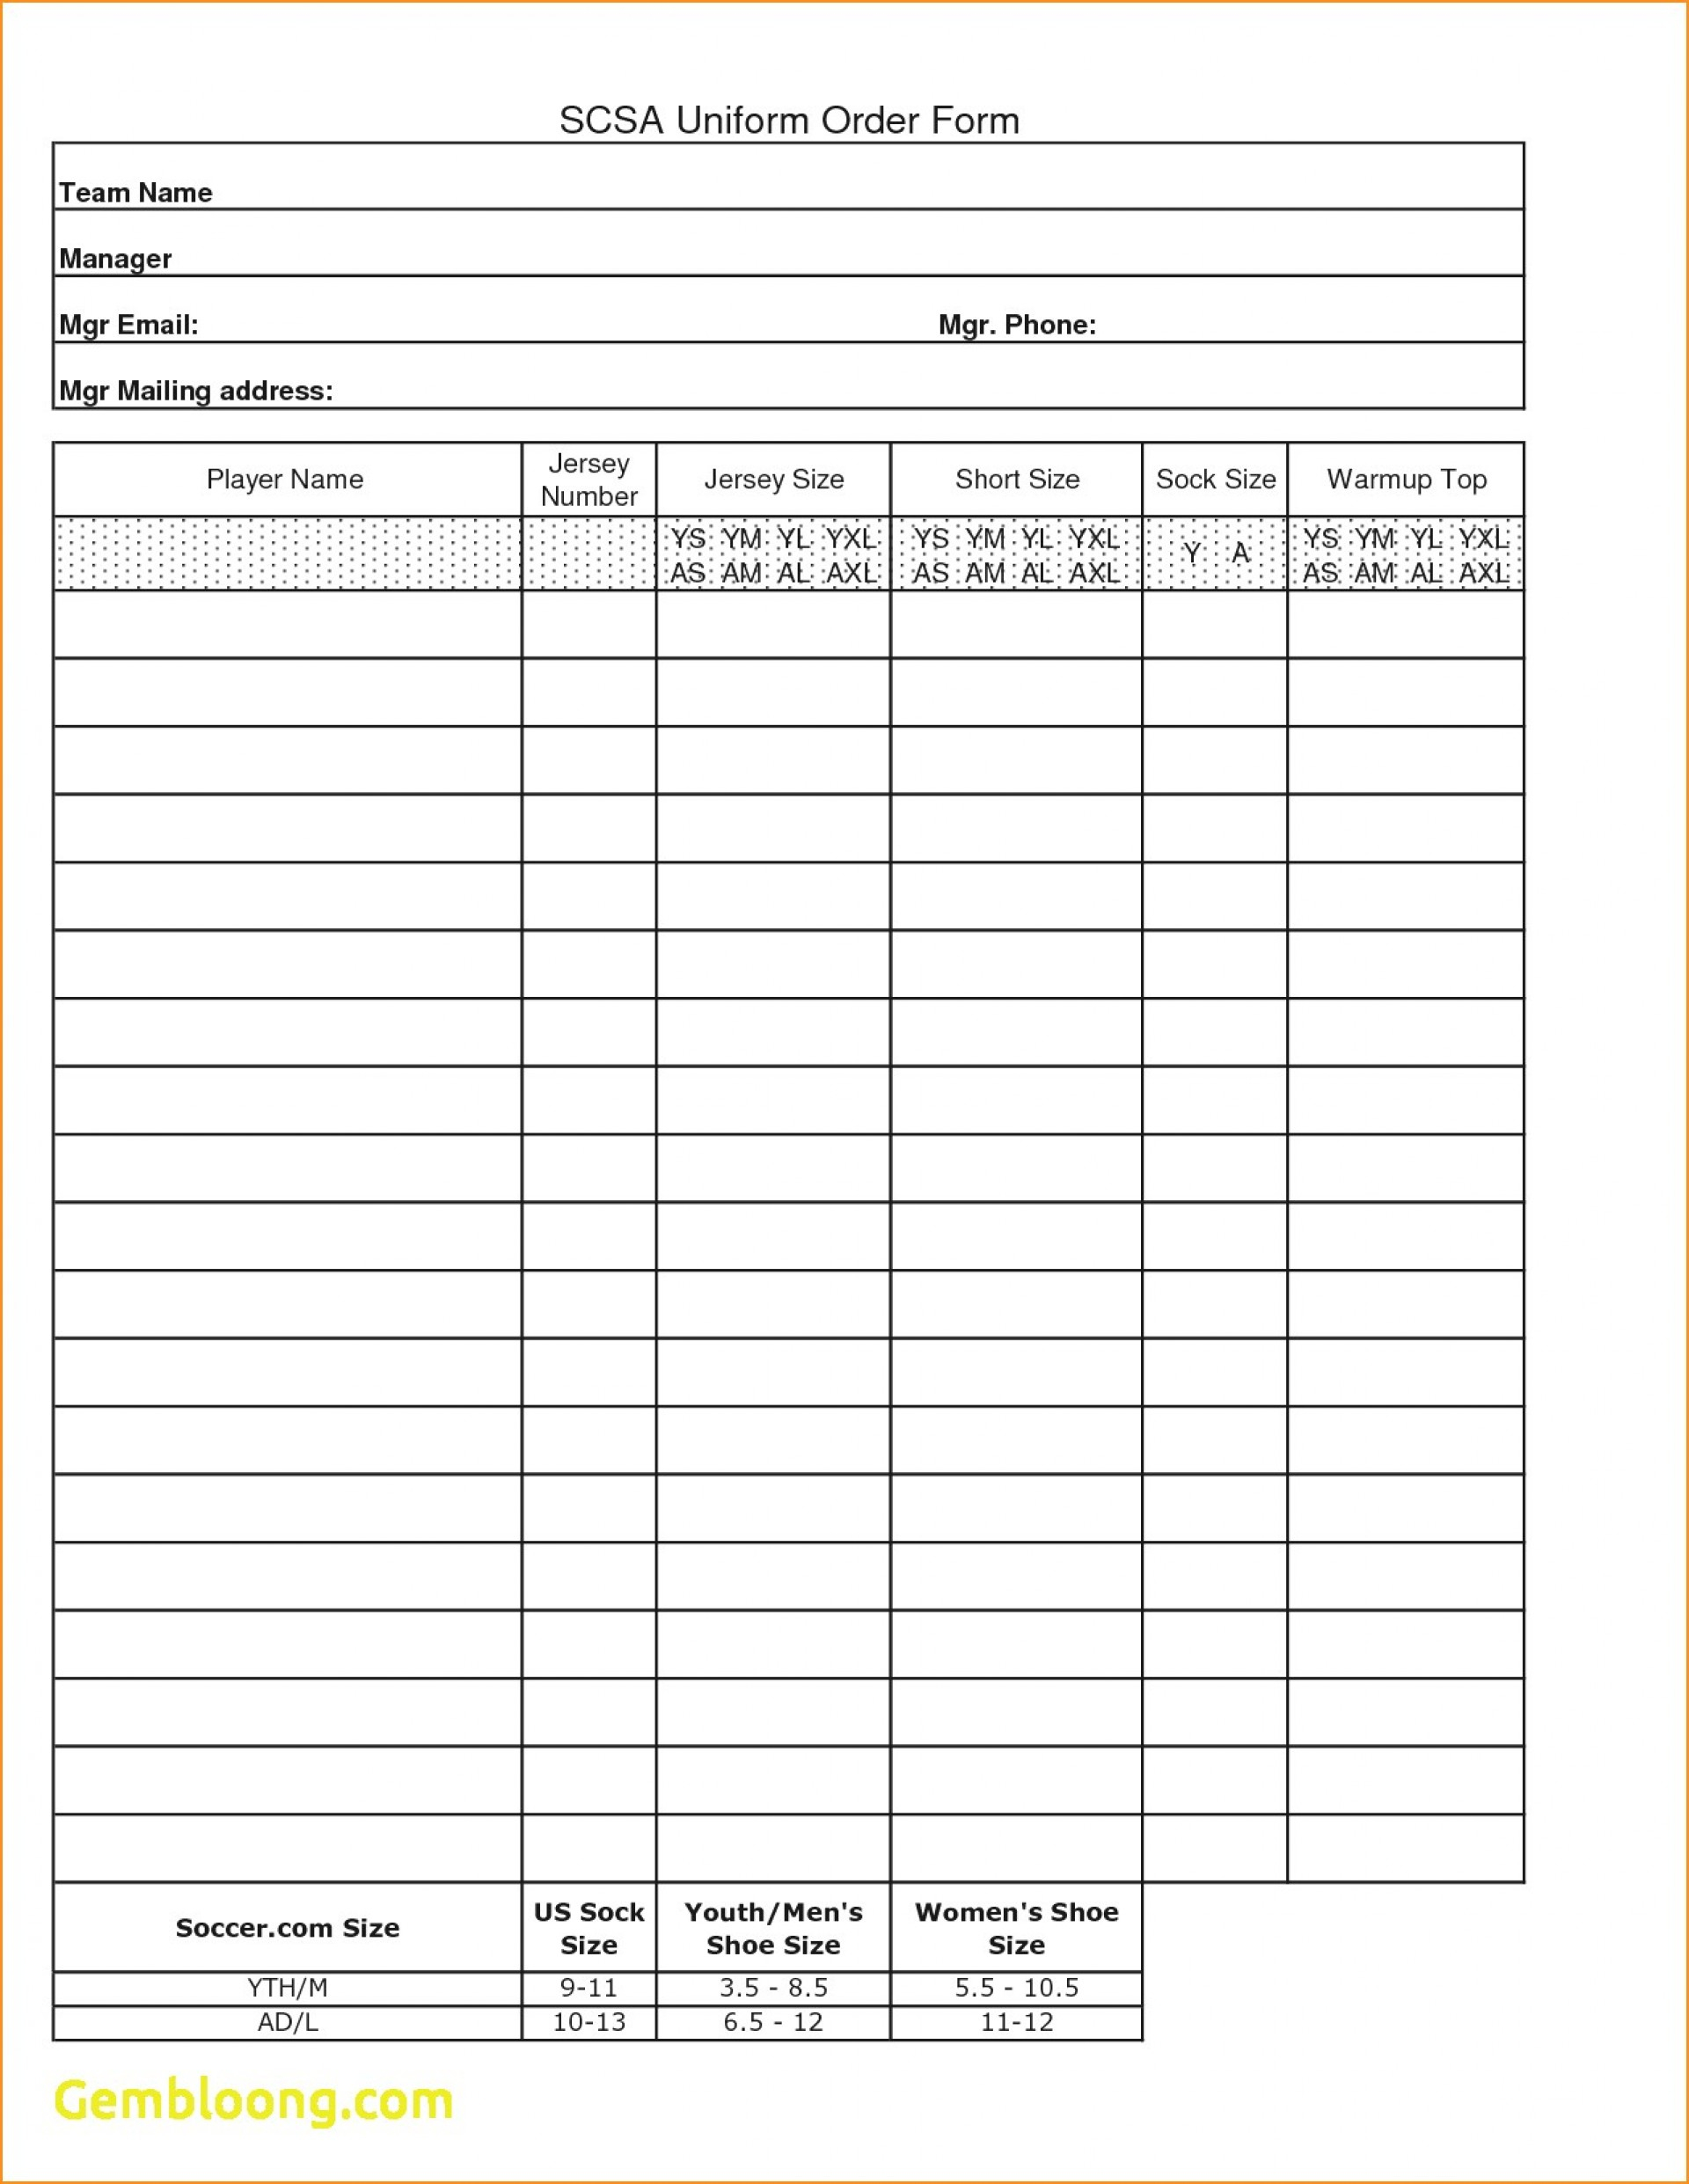 034 Blank Fundraiser Order Form Template Free Mary Resume With Regard To Blank Fundraiser Order Form Template